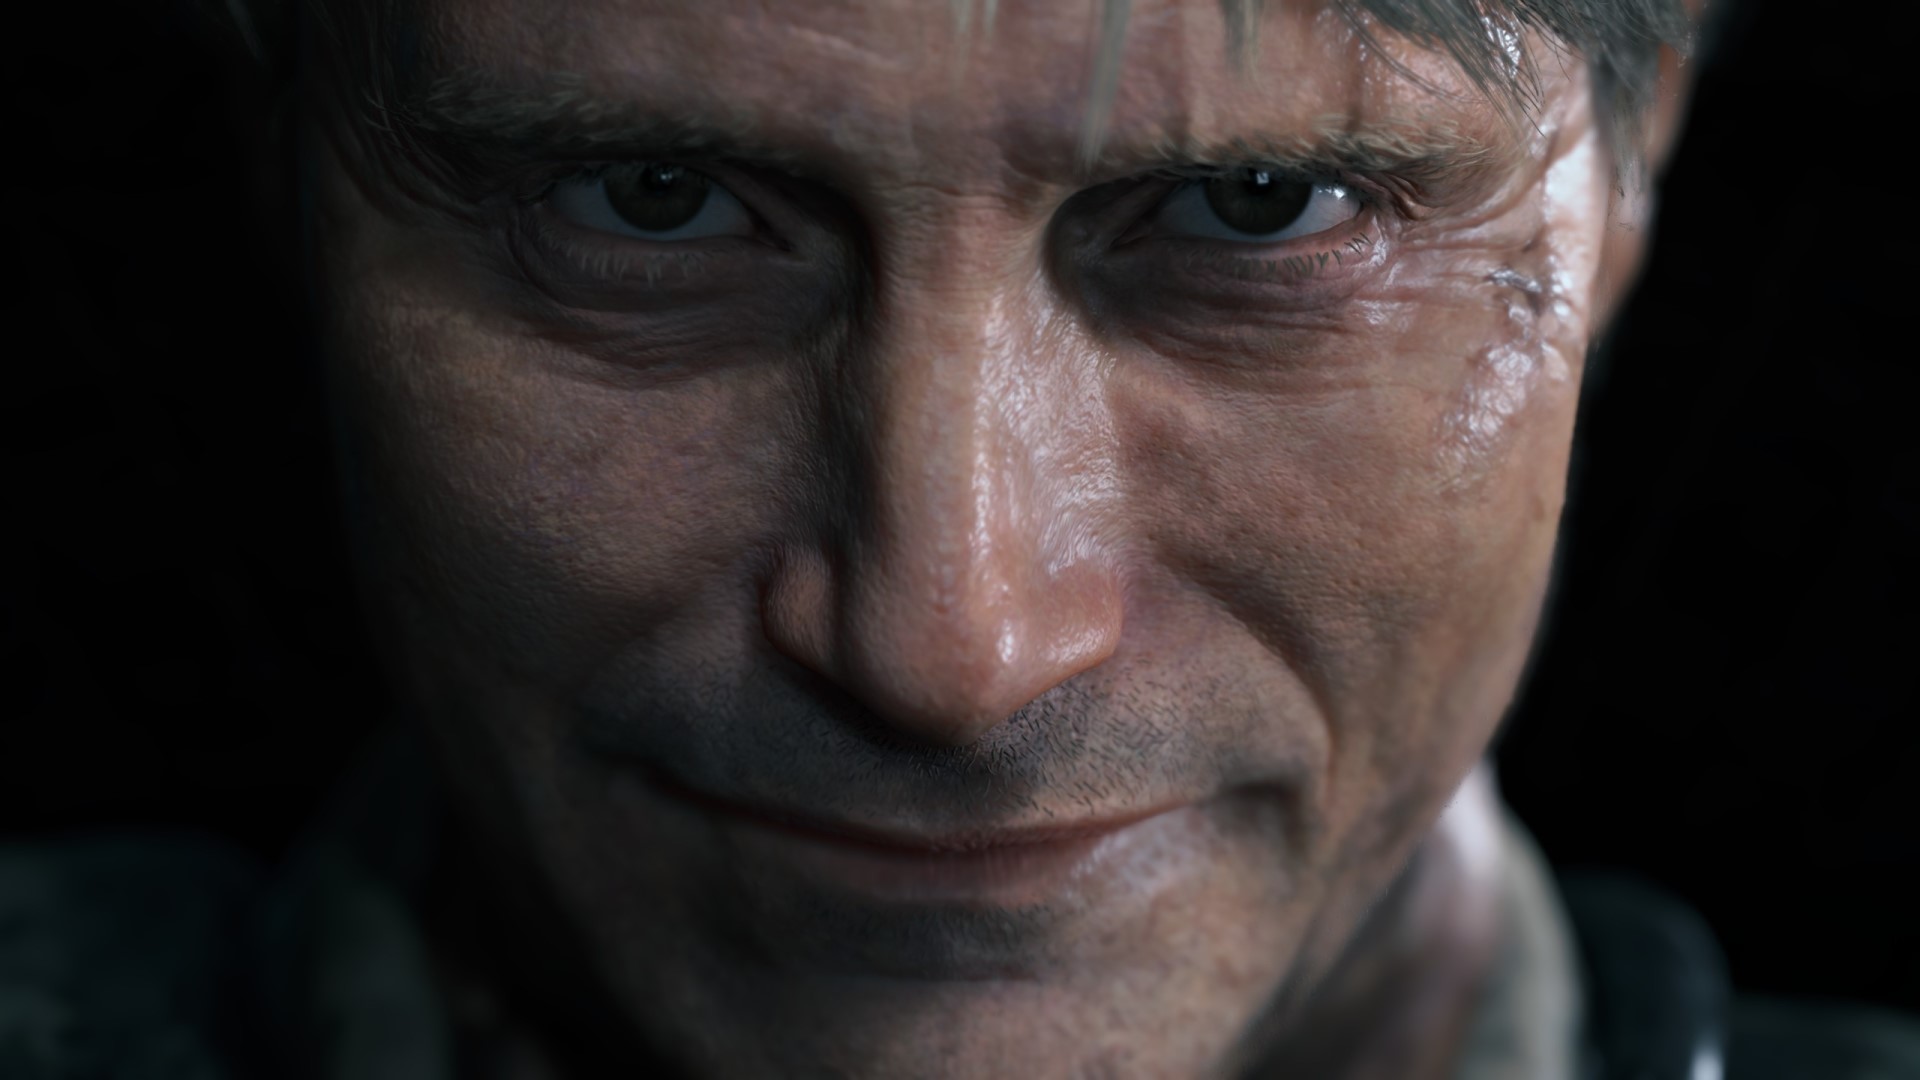 A Death Stranding movie is in the works